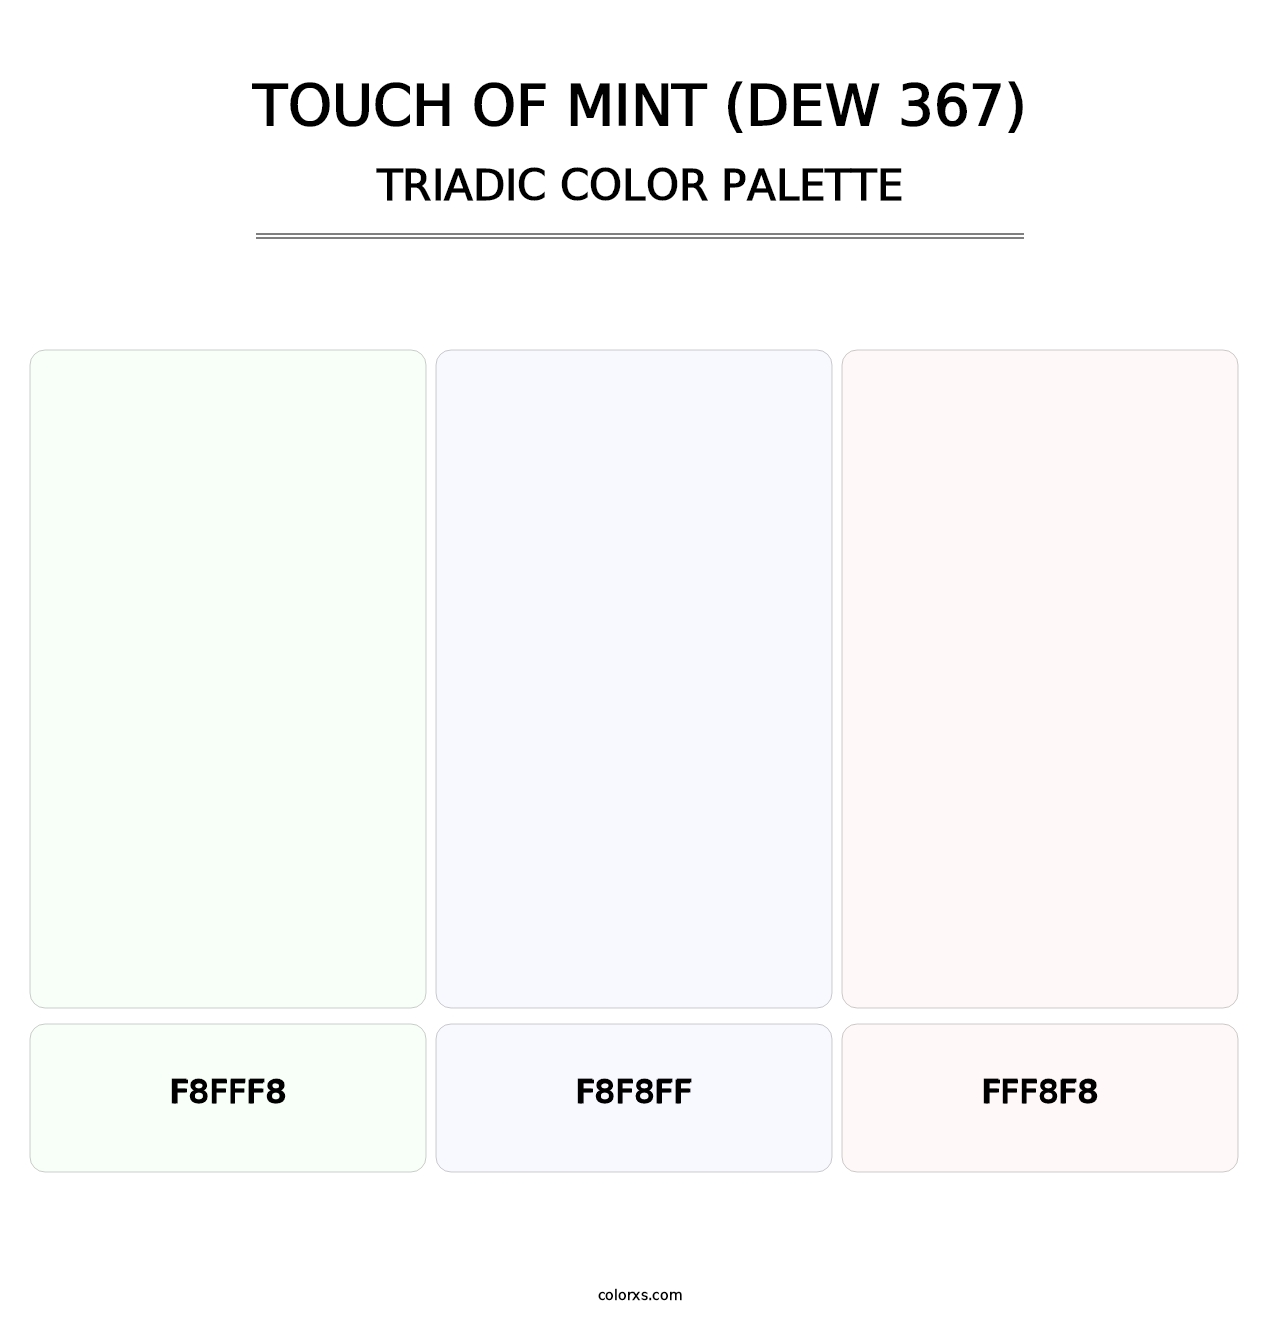 Touch of Mint (DEW 367) - Triadic Color Palette